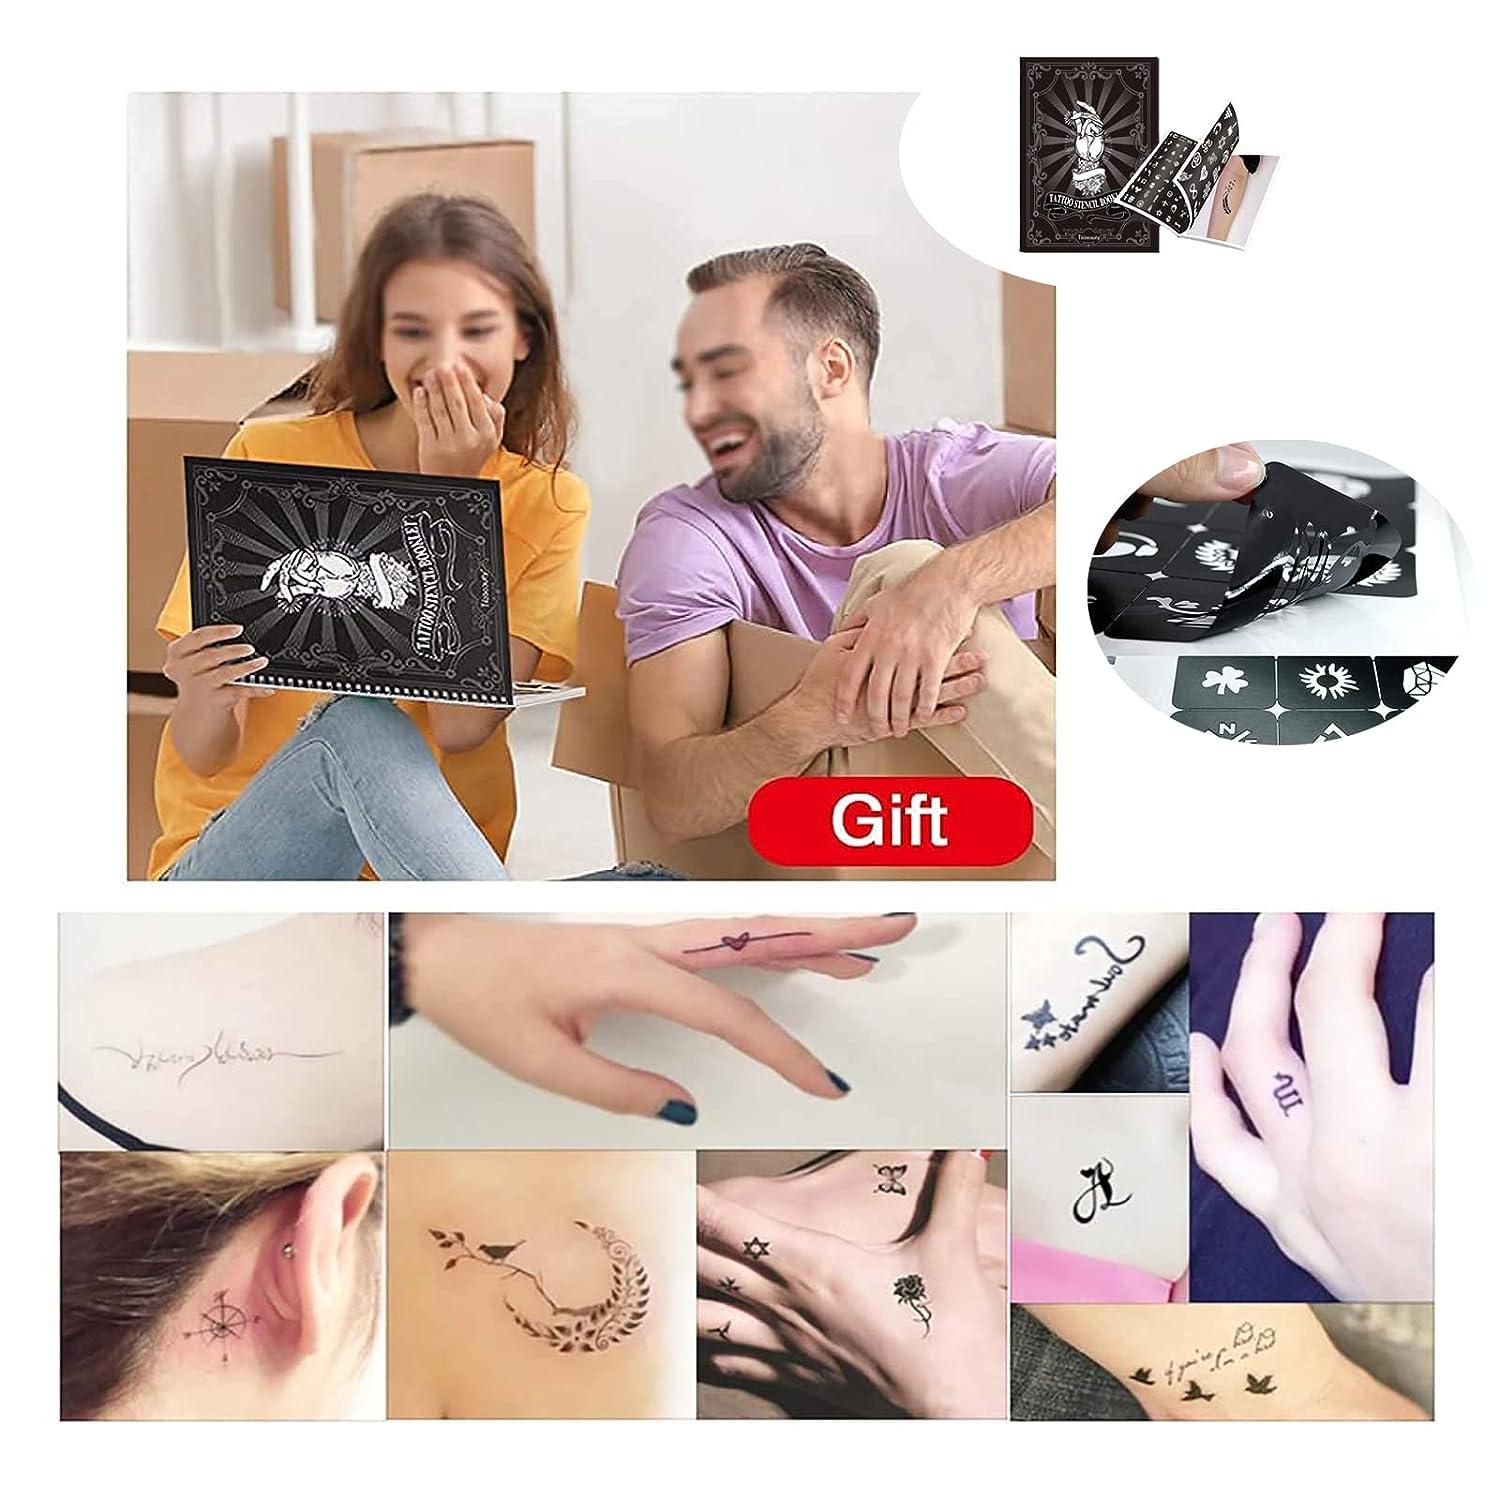 Mini Airbrush Tattoo Kit With Compressor Multi Function Nano Rechargeable  Spray Gun For Art Painting, Nail Cake Decorating, And Makeup Spraying From  Npkh, $25.66 | DHgate.Com